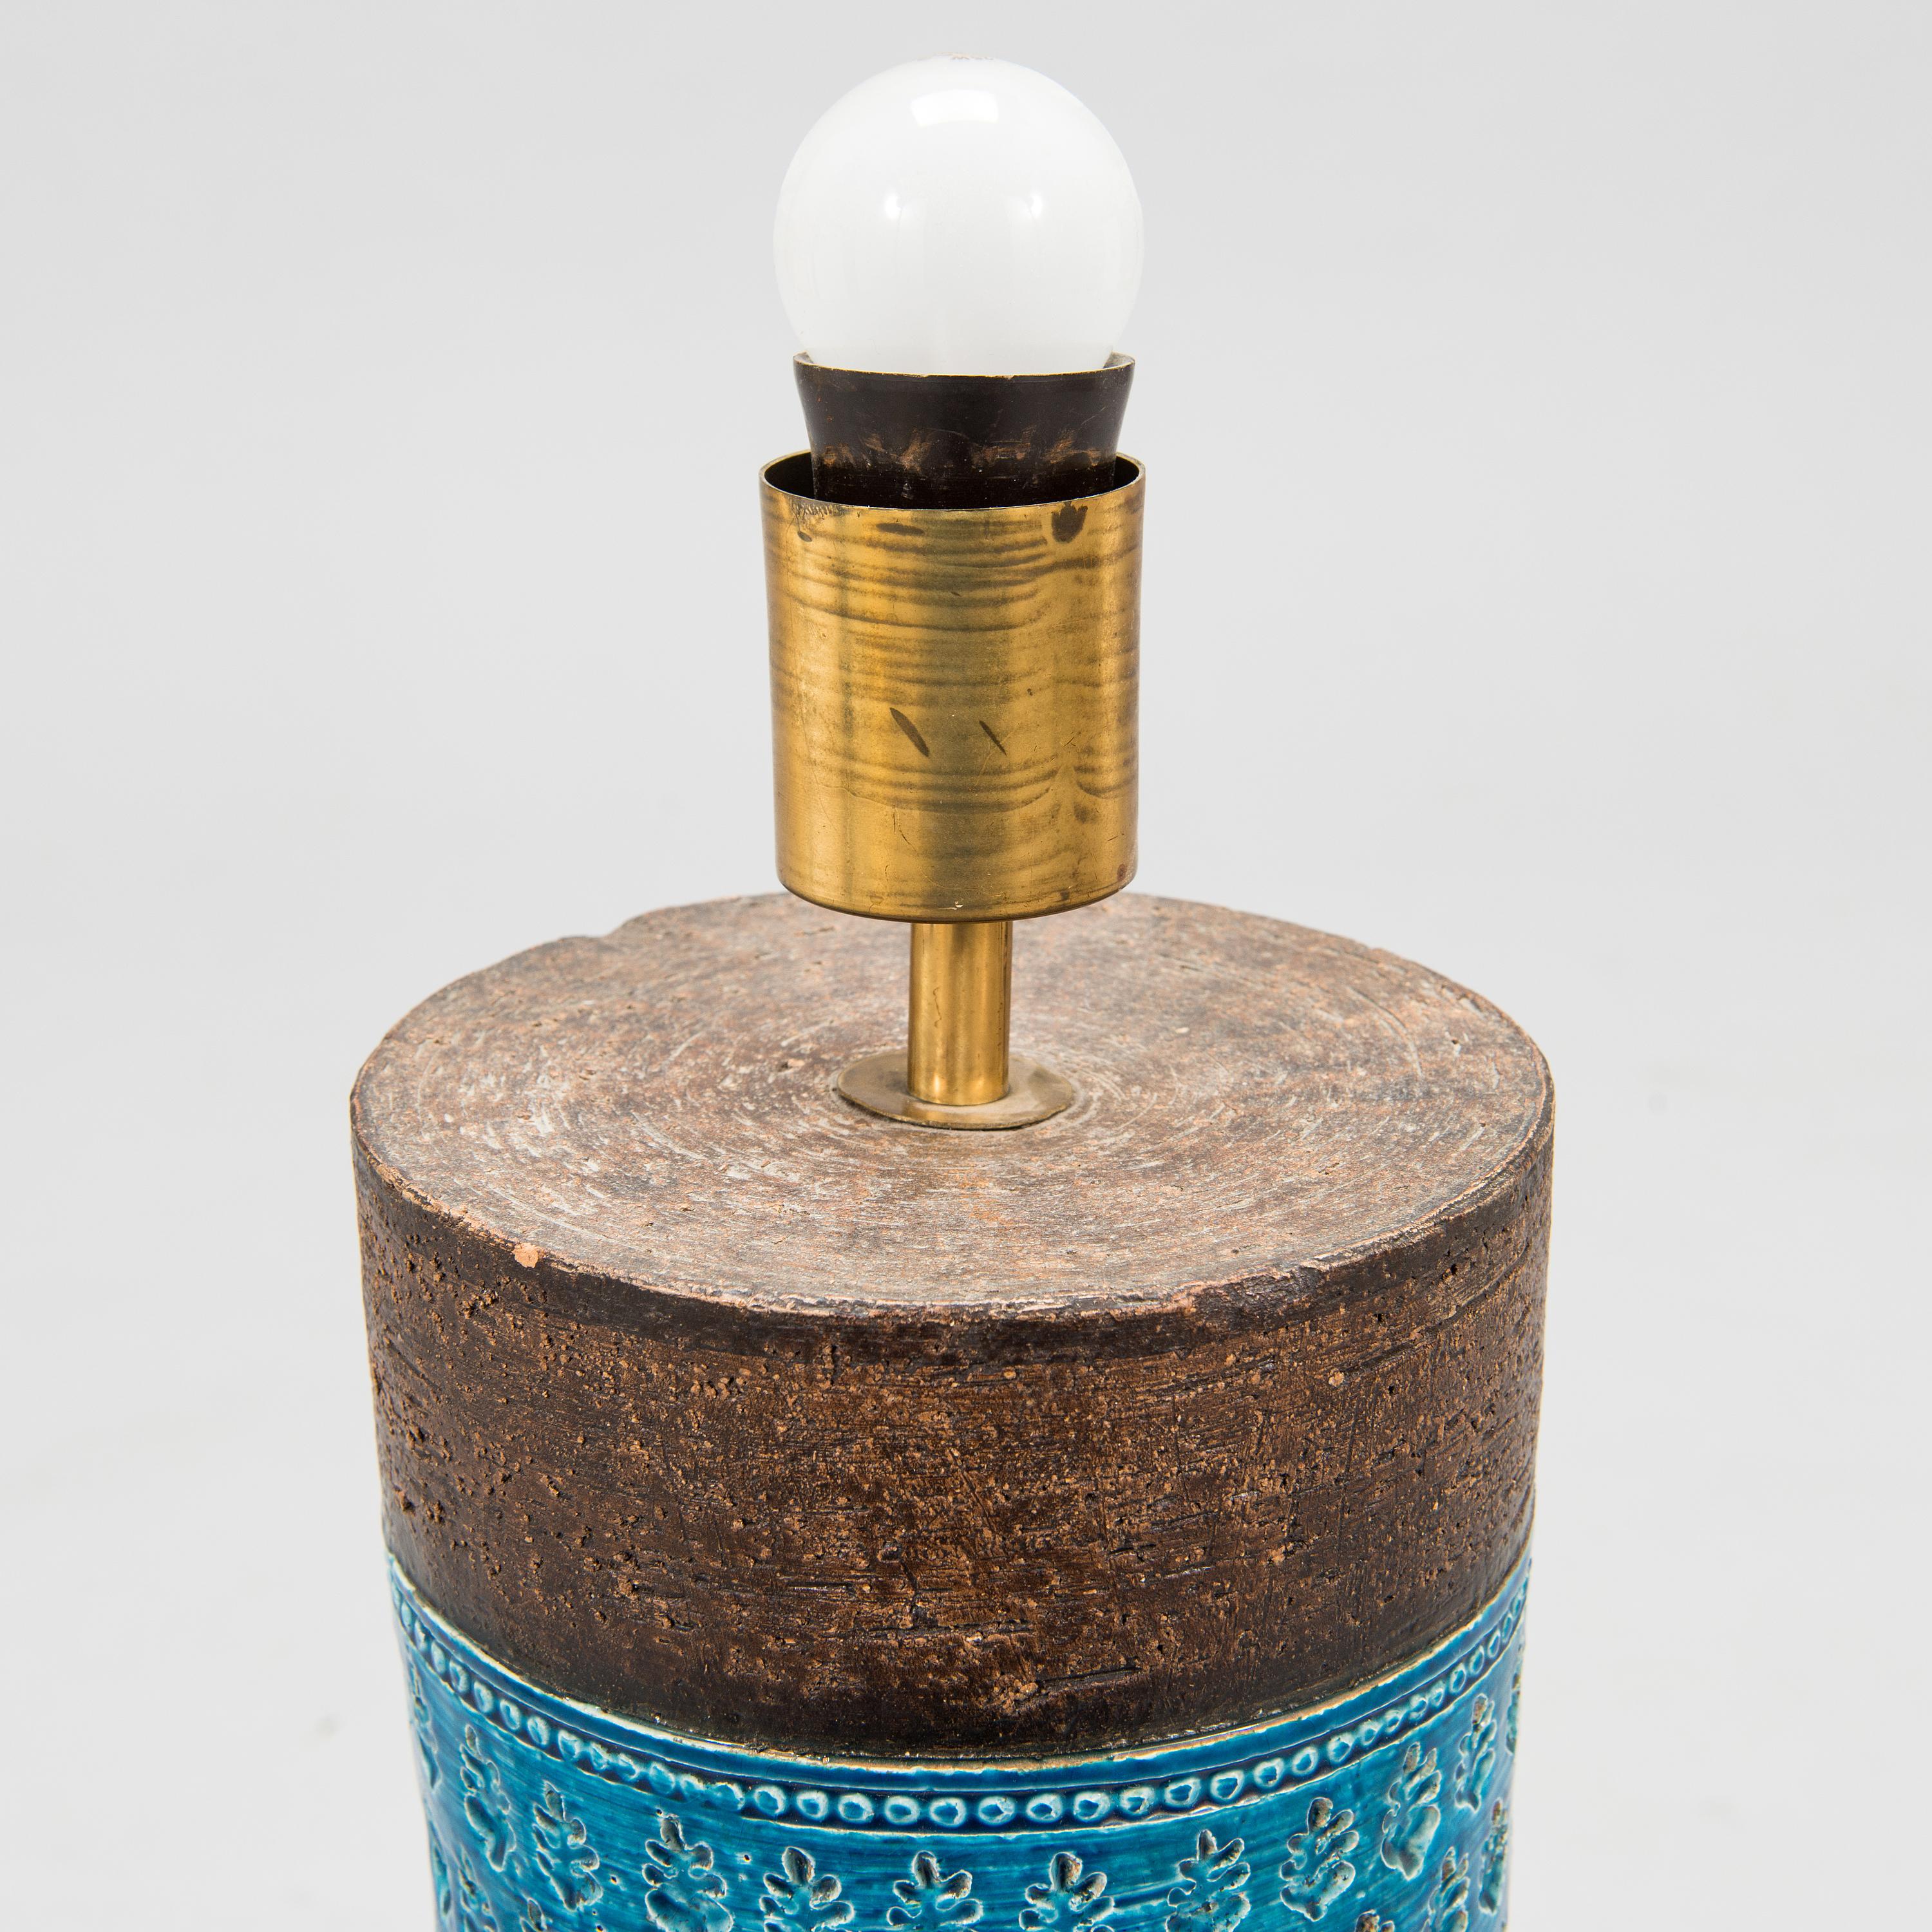 Aldo Londi Table  Lamp for Bitossi  ceramic with Turquoise glazing made in  Italy around 1960
Height of the ceramic body incl.socket: 54 cm. Total height 87 cm; Diameter of the shade 41 cm.
Good condition